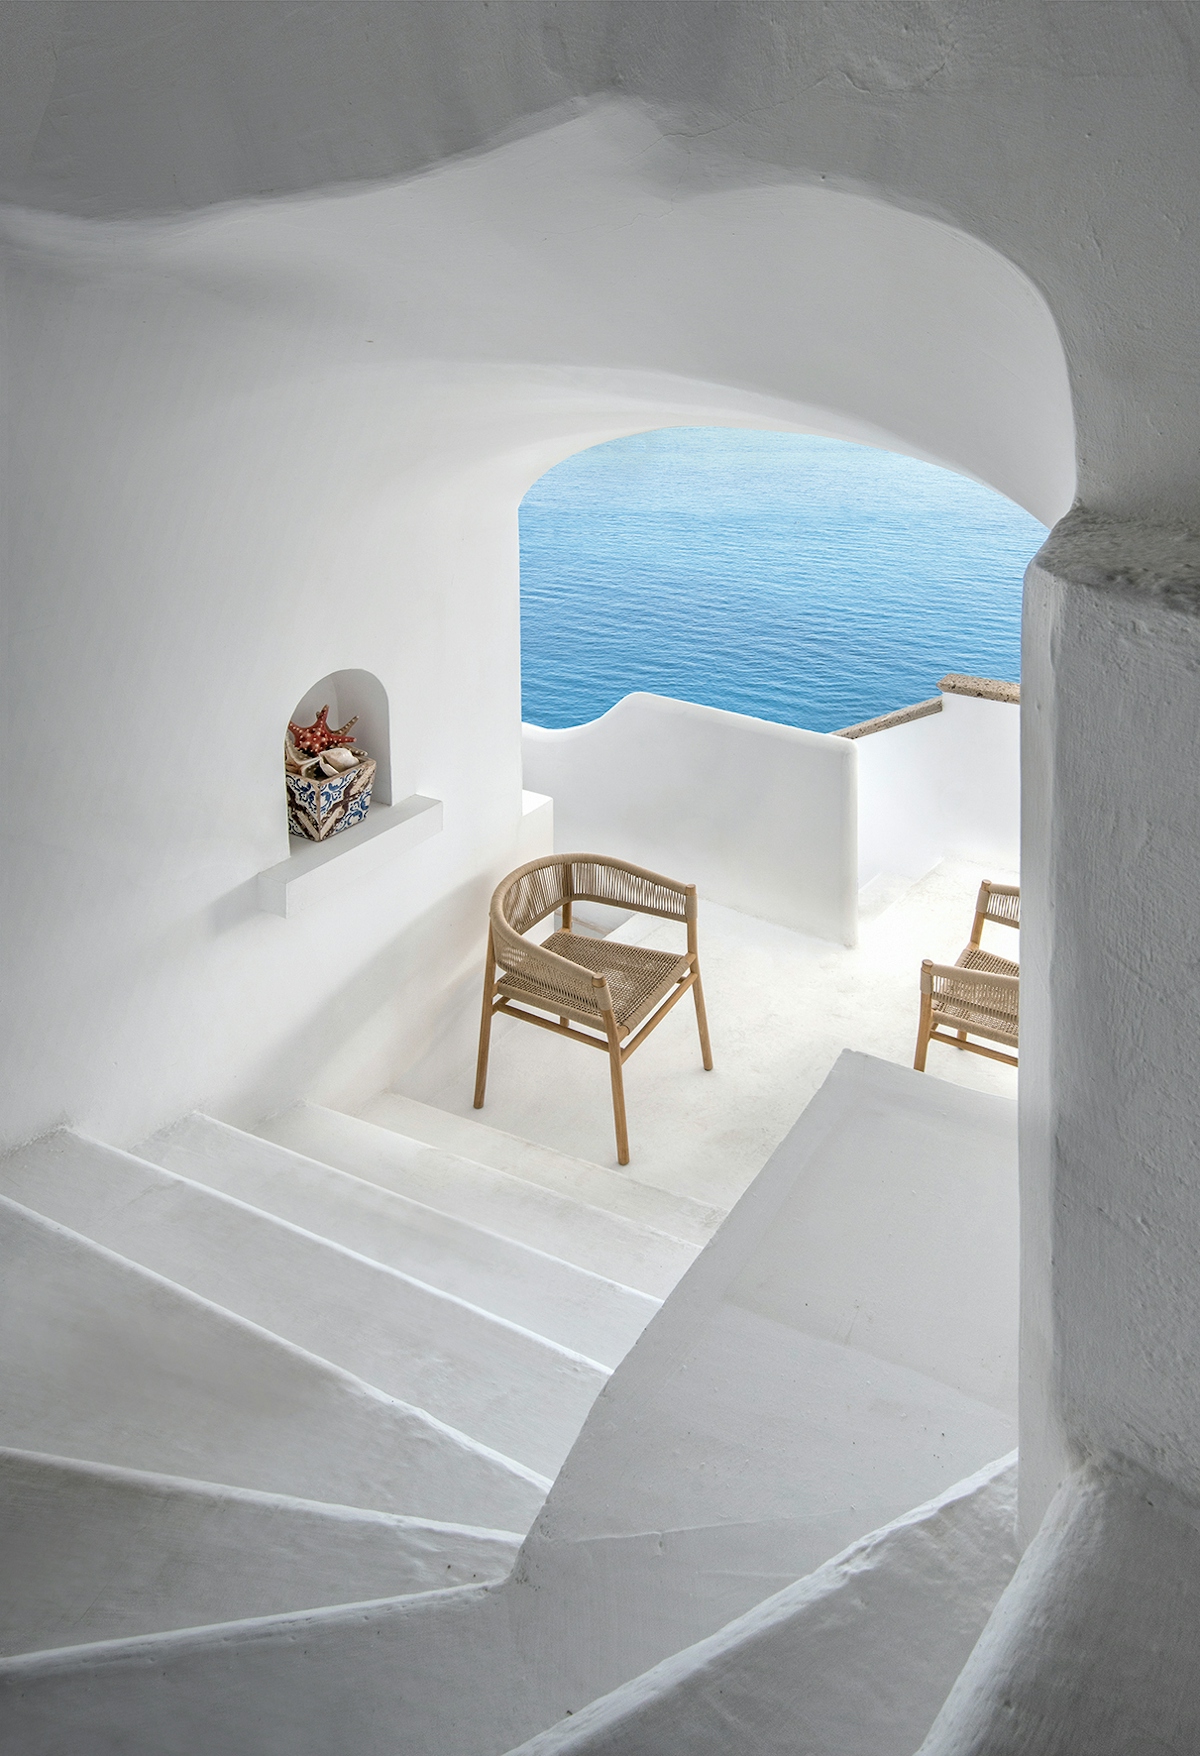 Ethimo Kilt outdoor dining chair in Greek minimalist setting beside the sea